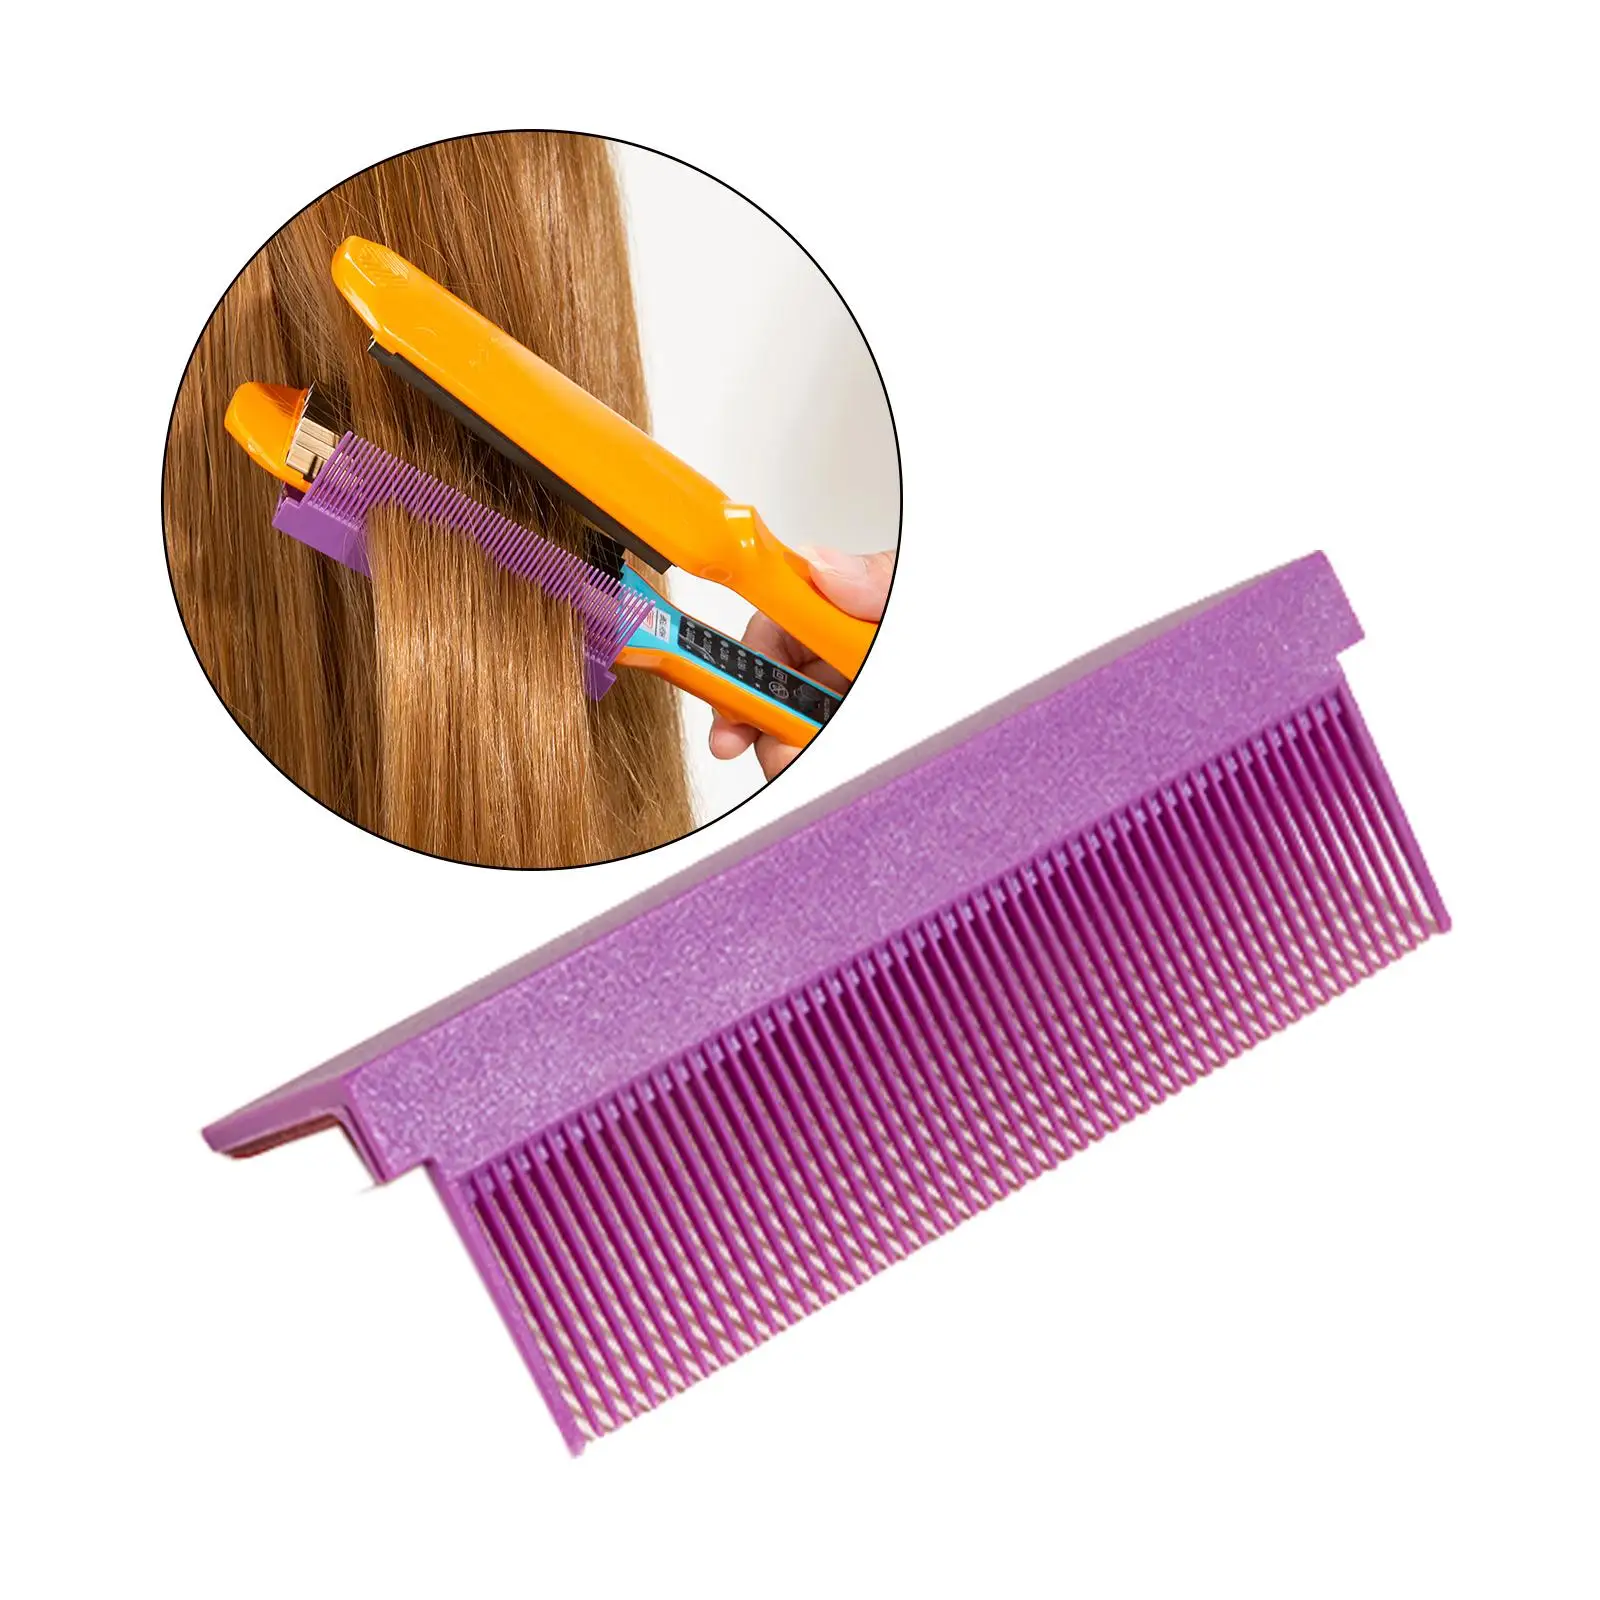 Straightening Comb Attachment Hairdressing Comb for Salon Home DIY Accessories Fine Hair Comb Hair Straightener Comb Attachment